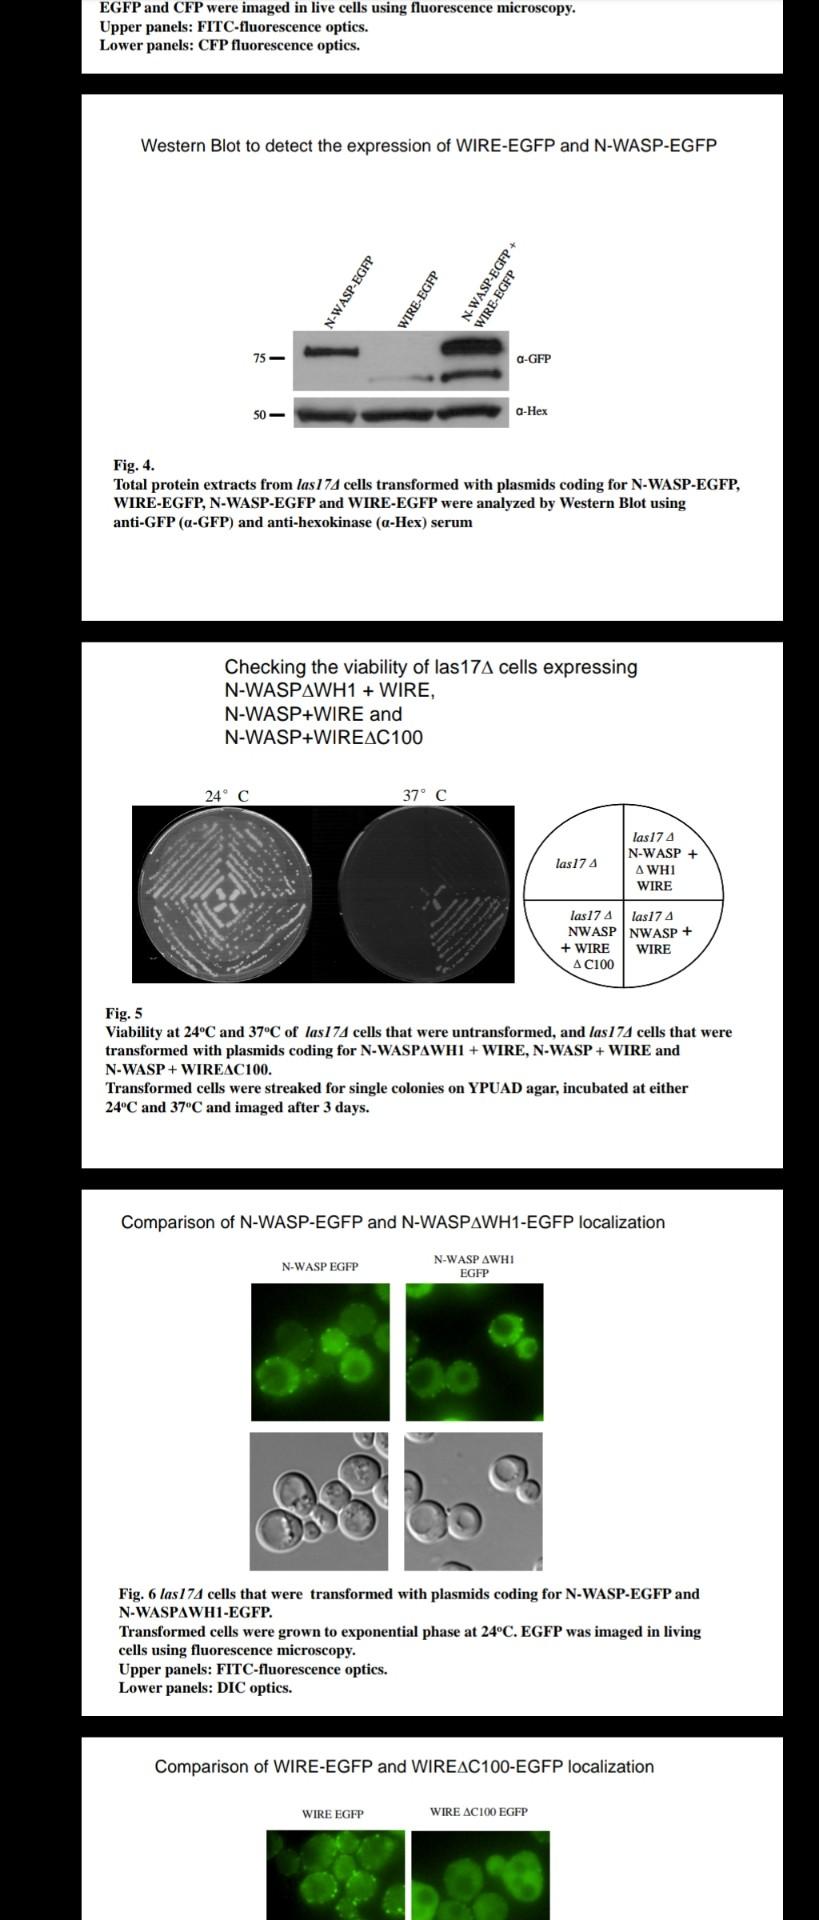 EGFP and CFP were imaged in live cells using fluorescence microscopy. Upper panels: FITC-fluorescence optics. Lower panels: C